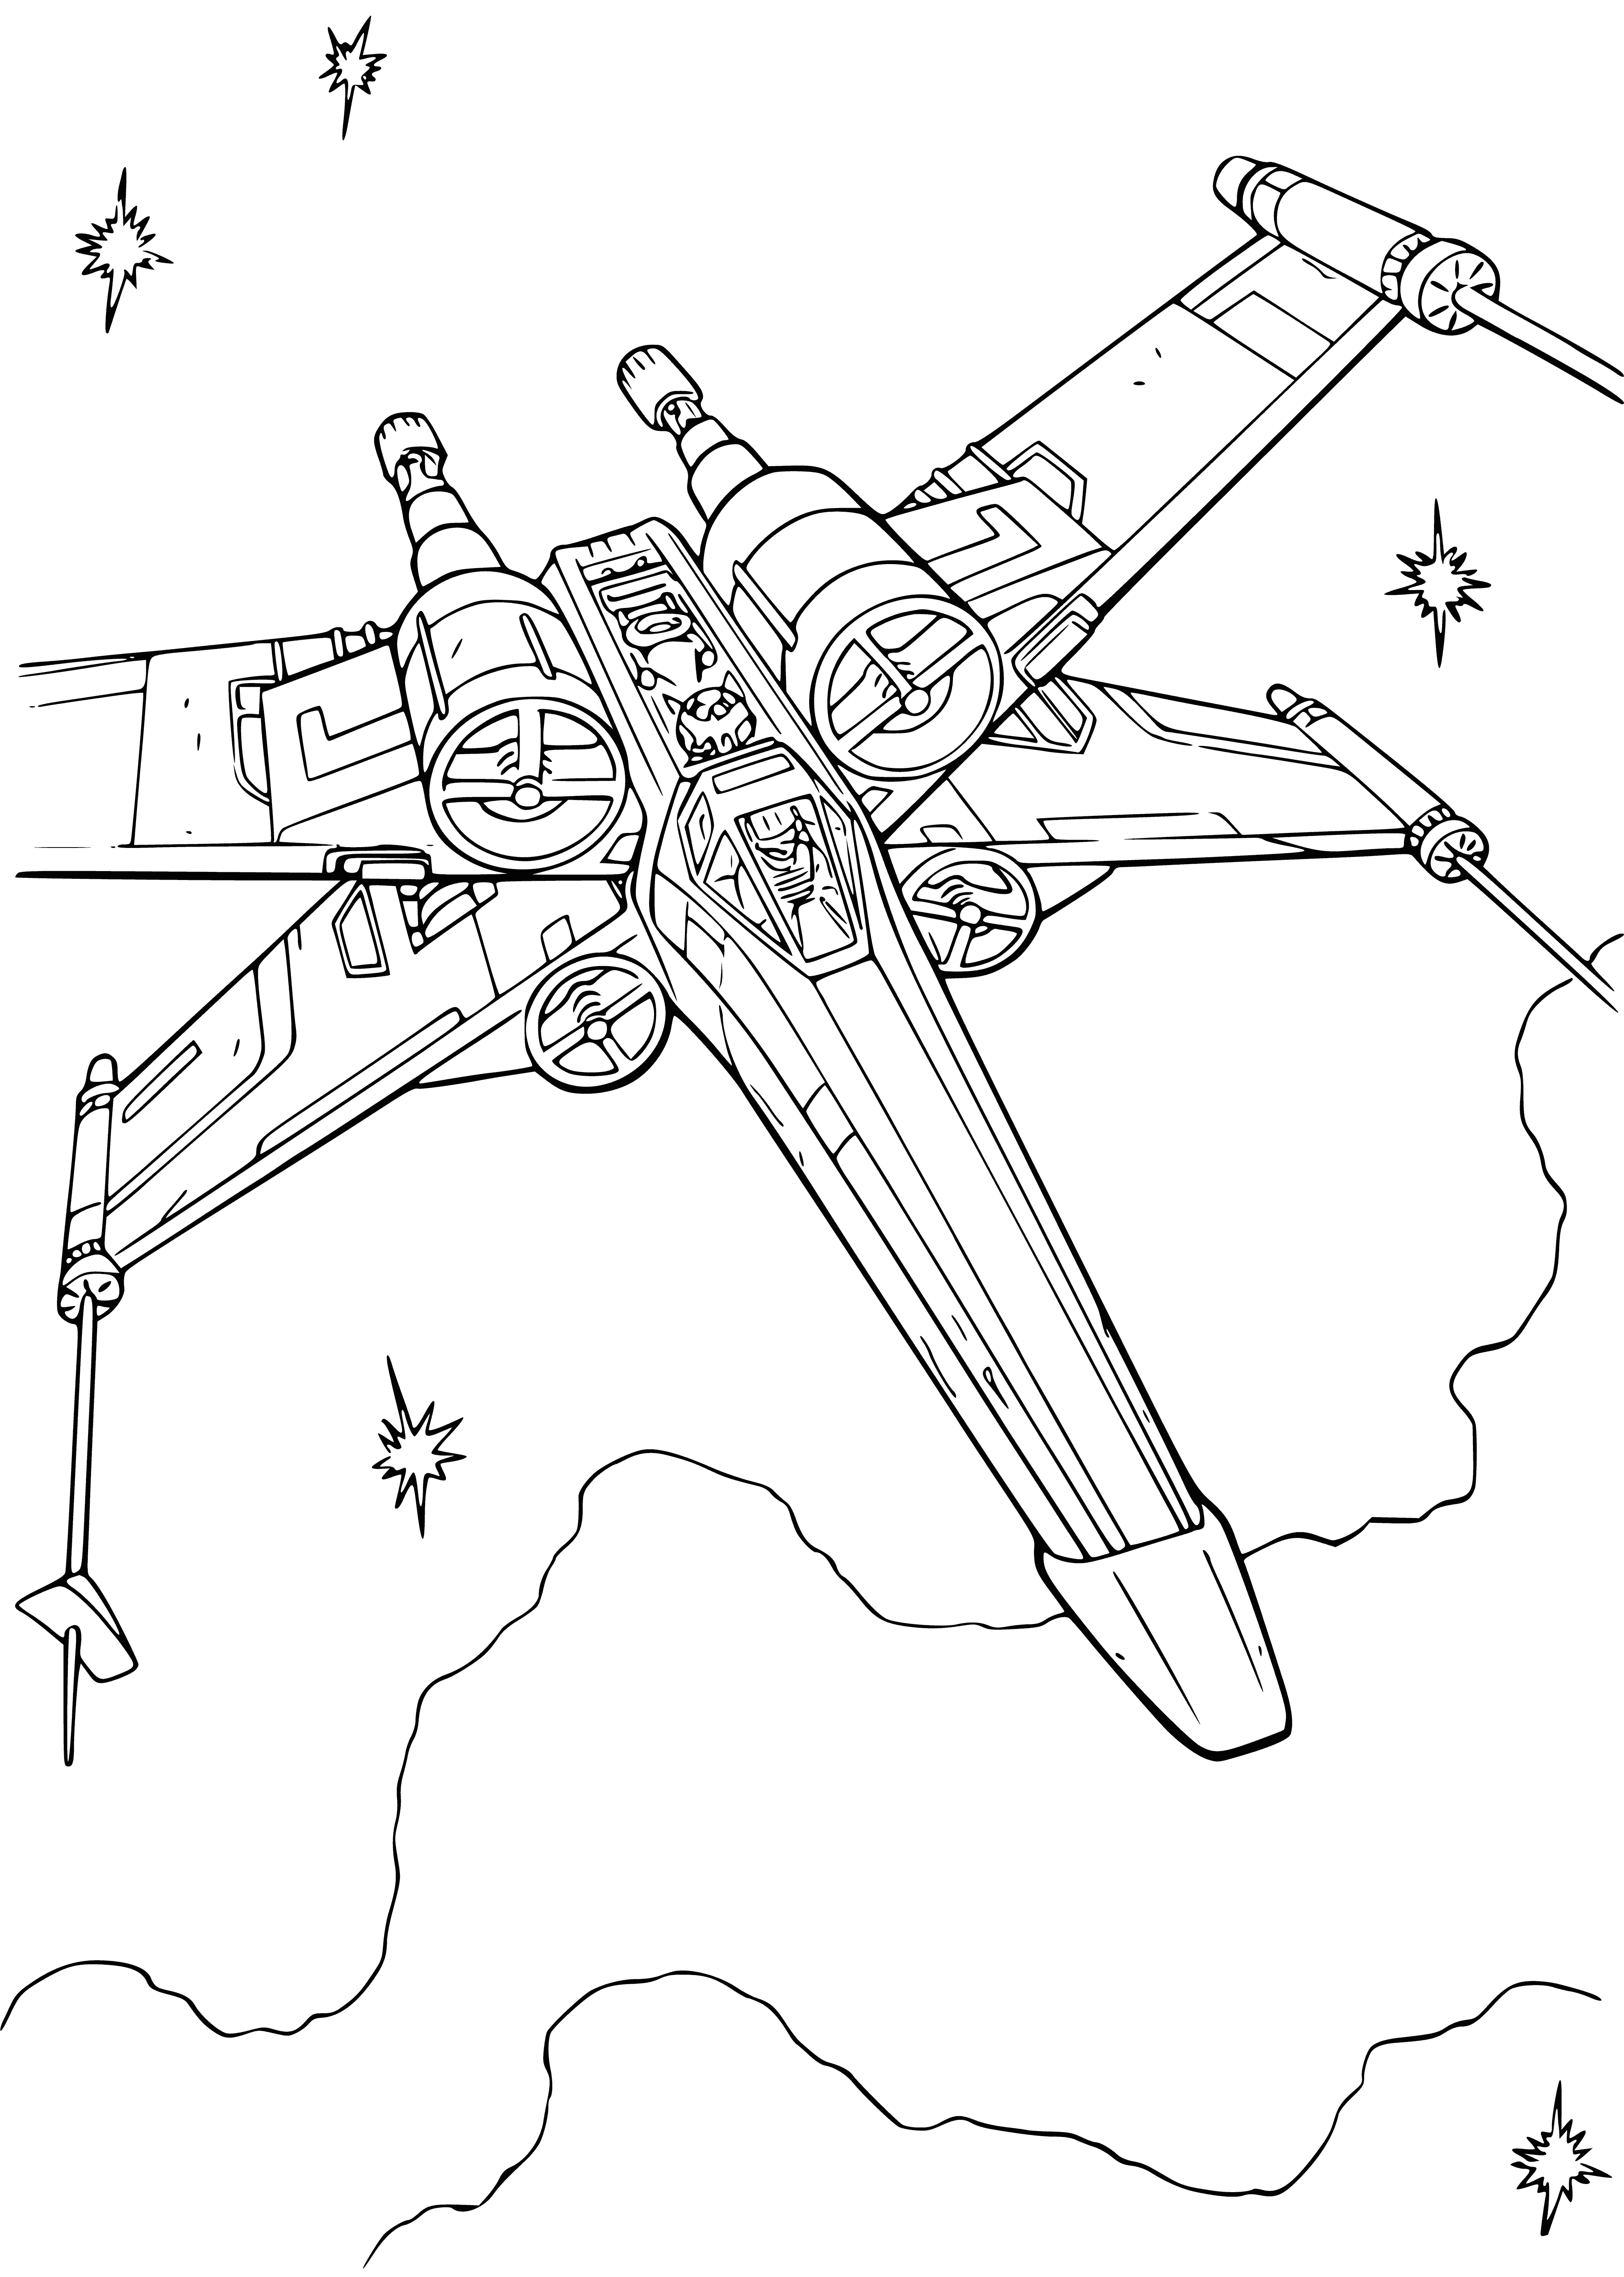 Rebel fighter coloring page